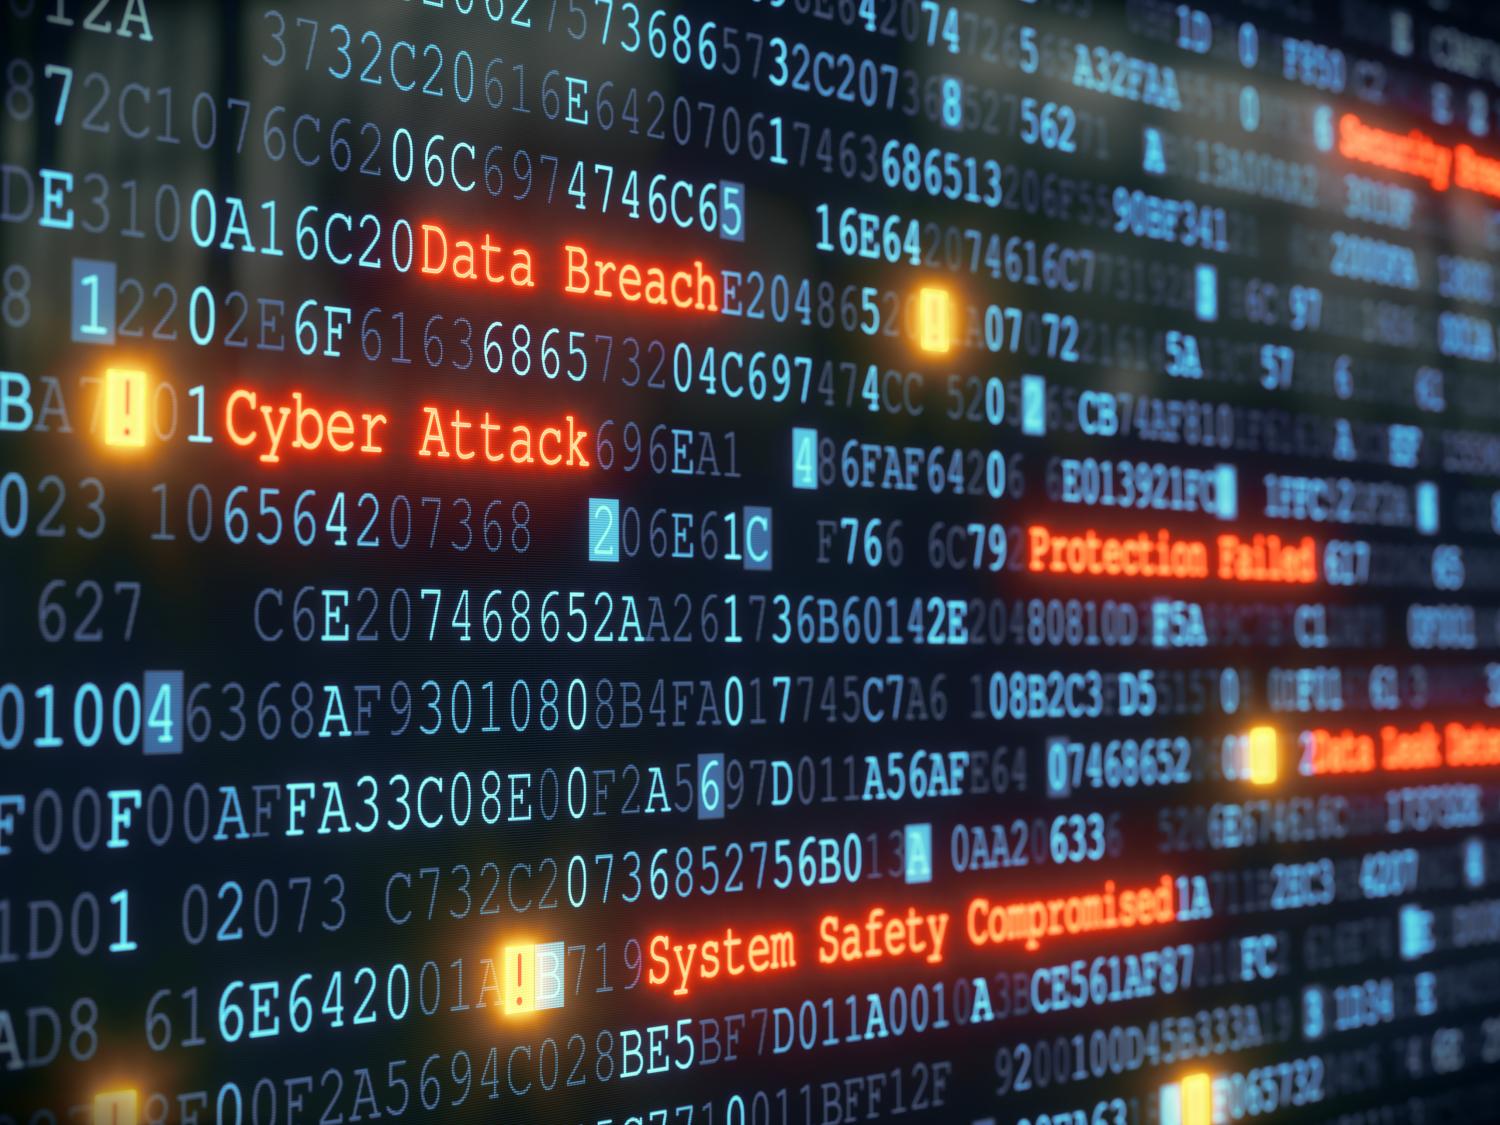 Multi-university grant extended to advance adaptive cyber defense research